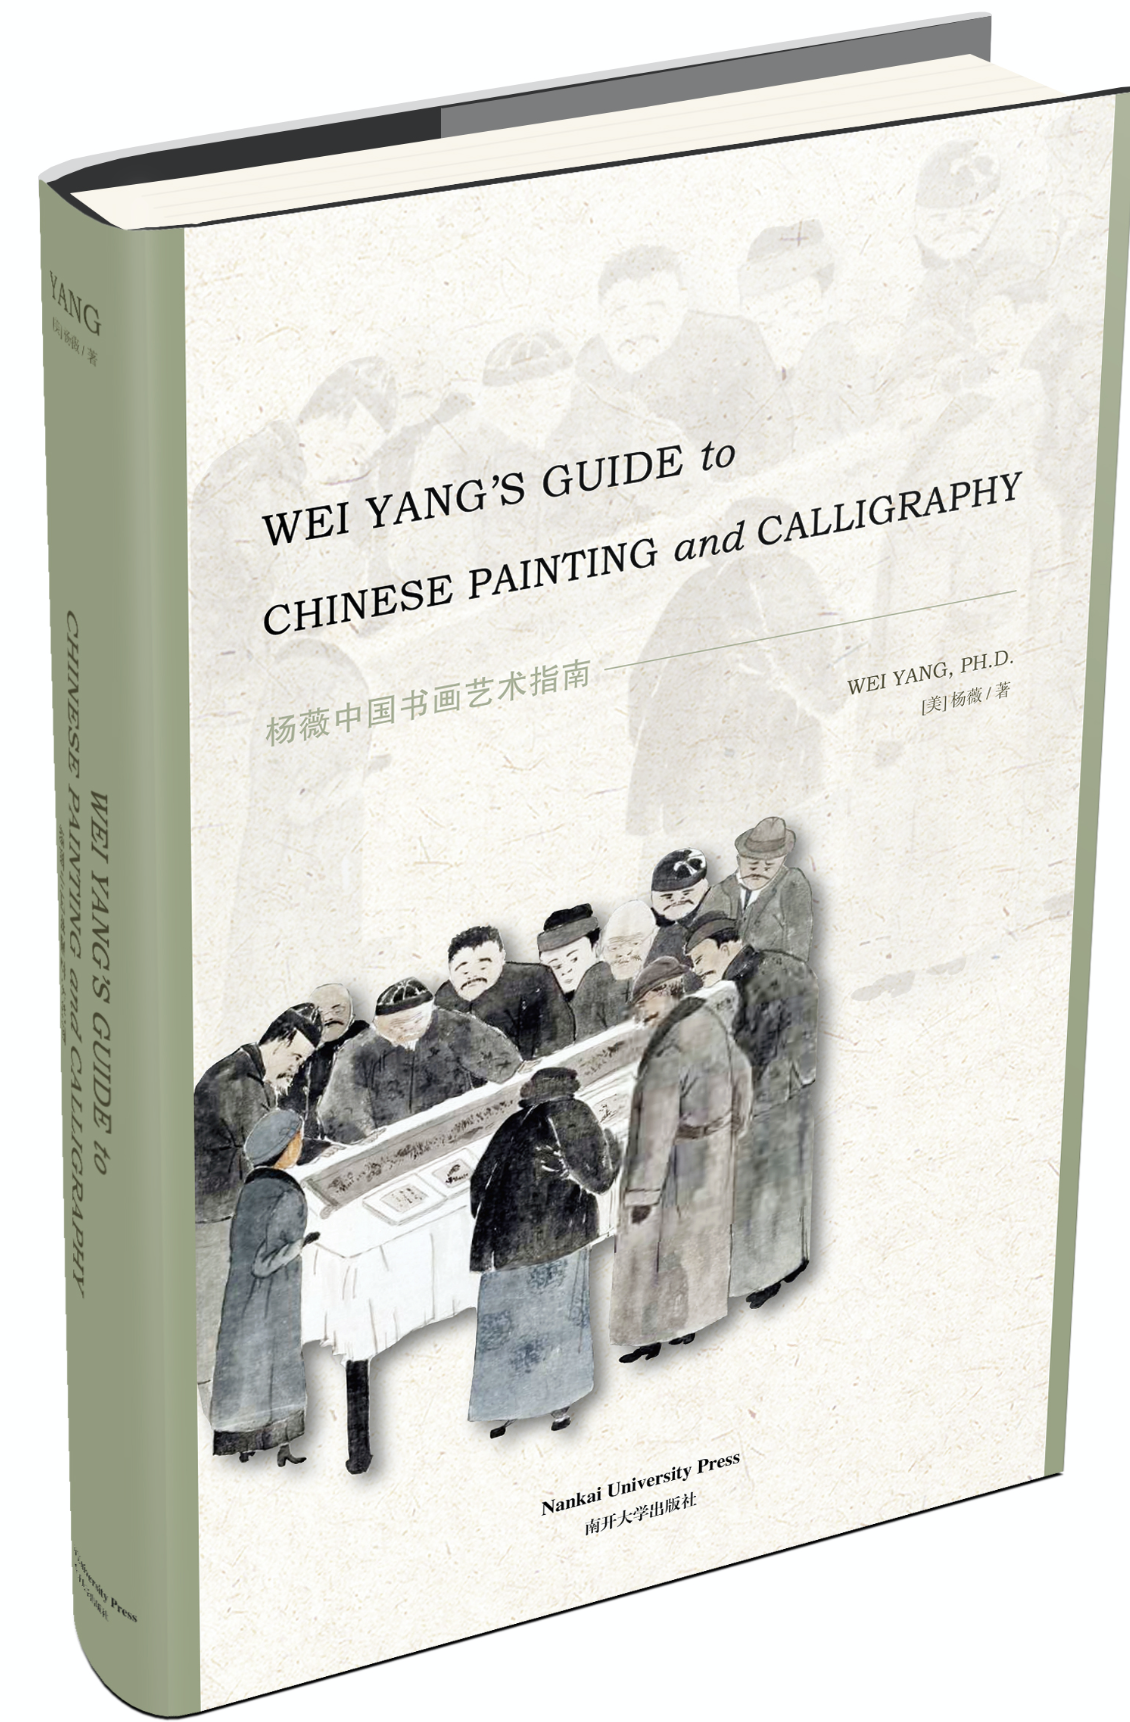 Wei Yang's Guide to Chinese Painting & Calligraphy